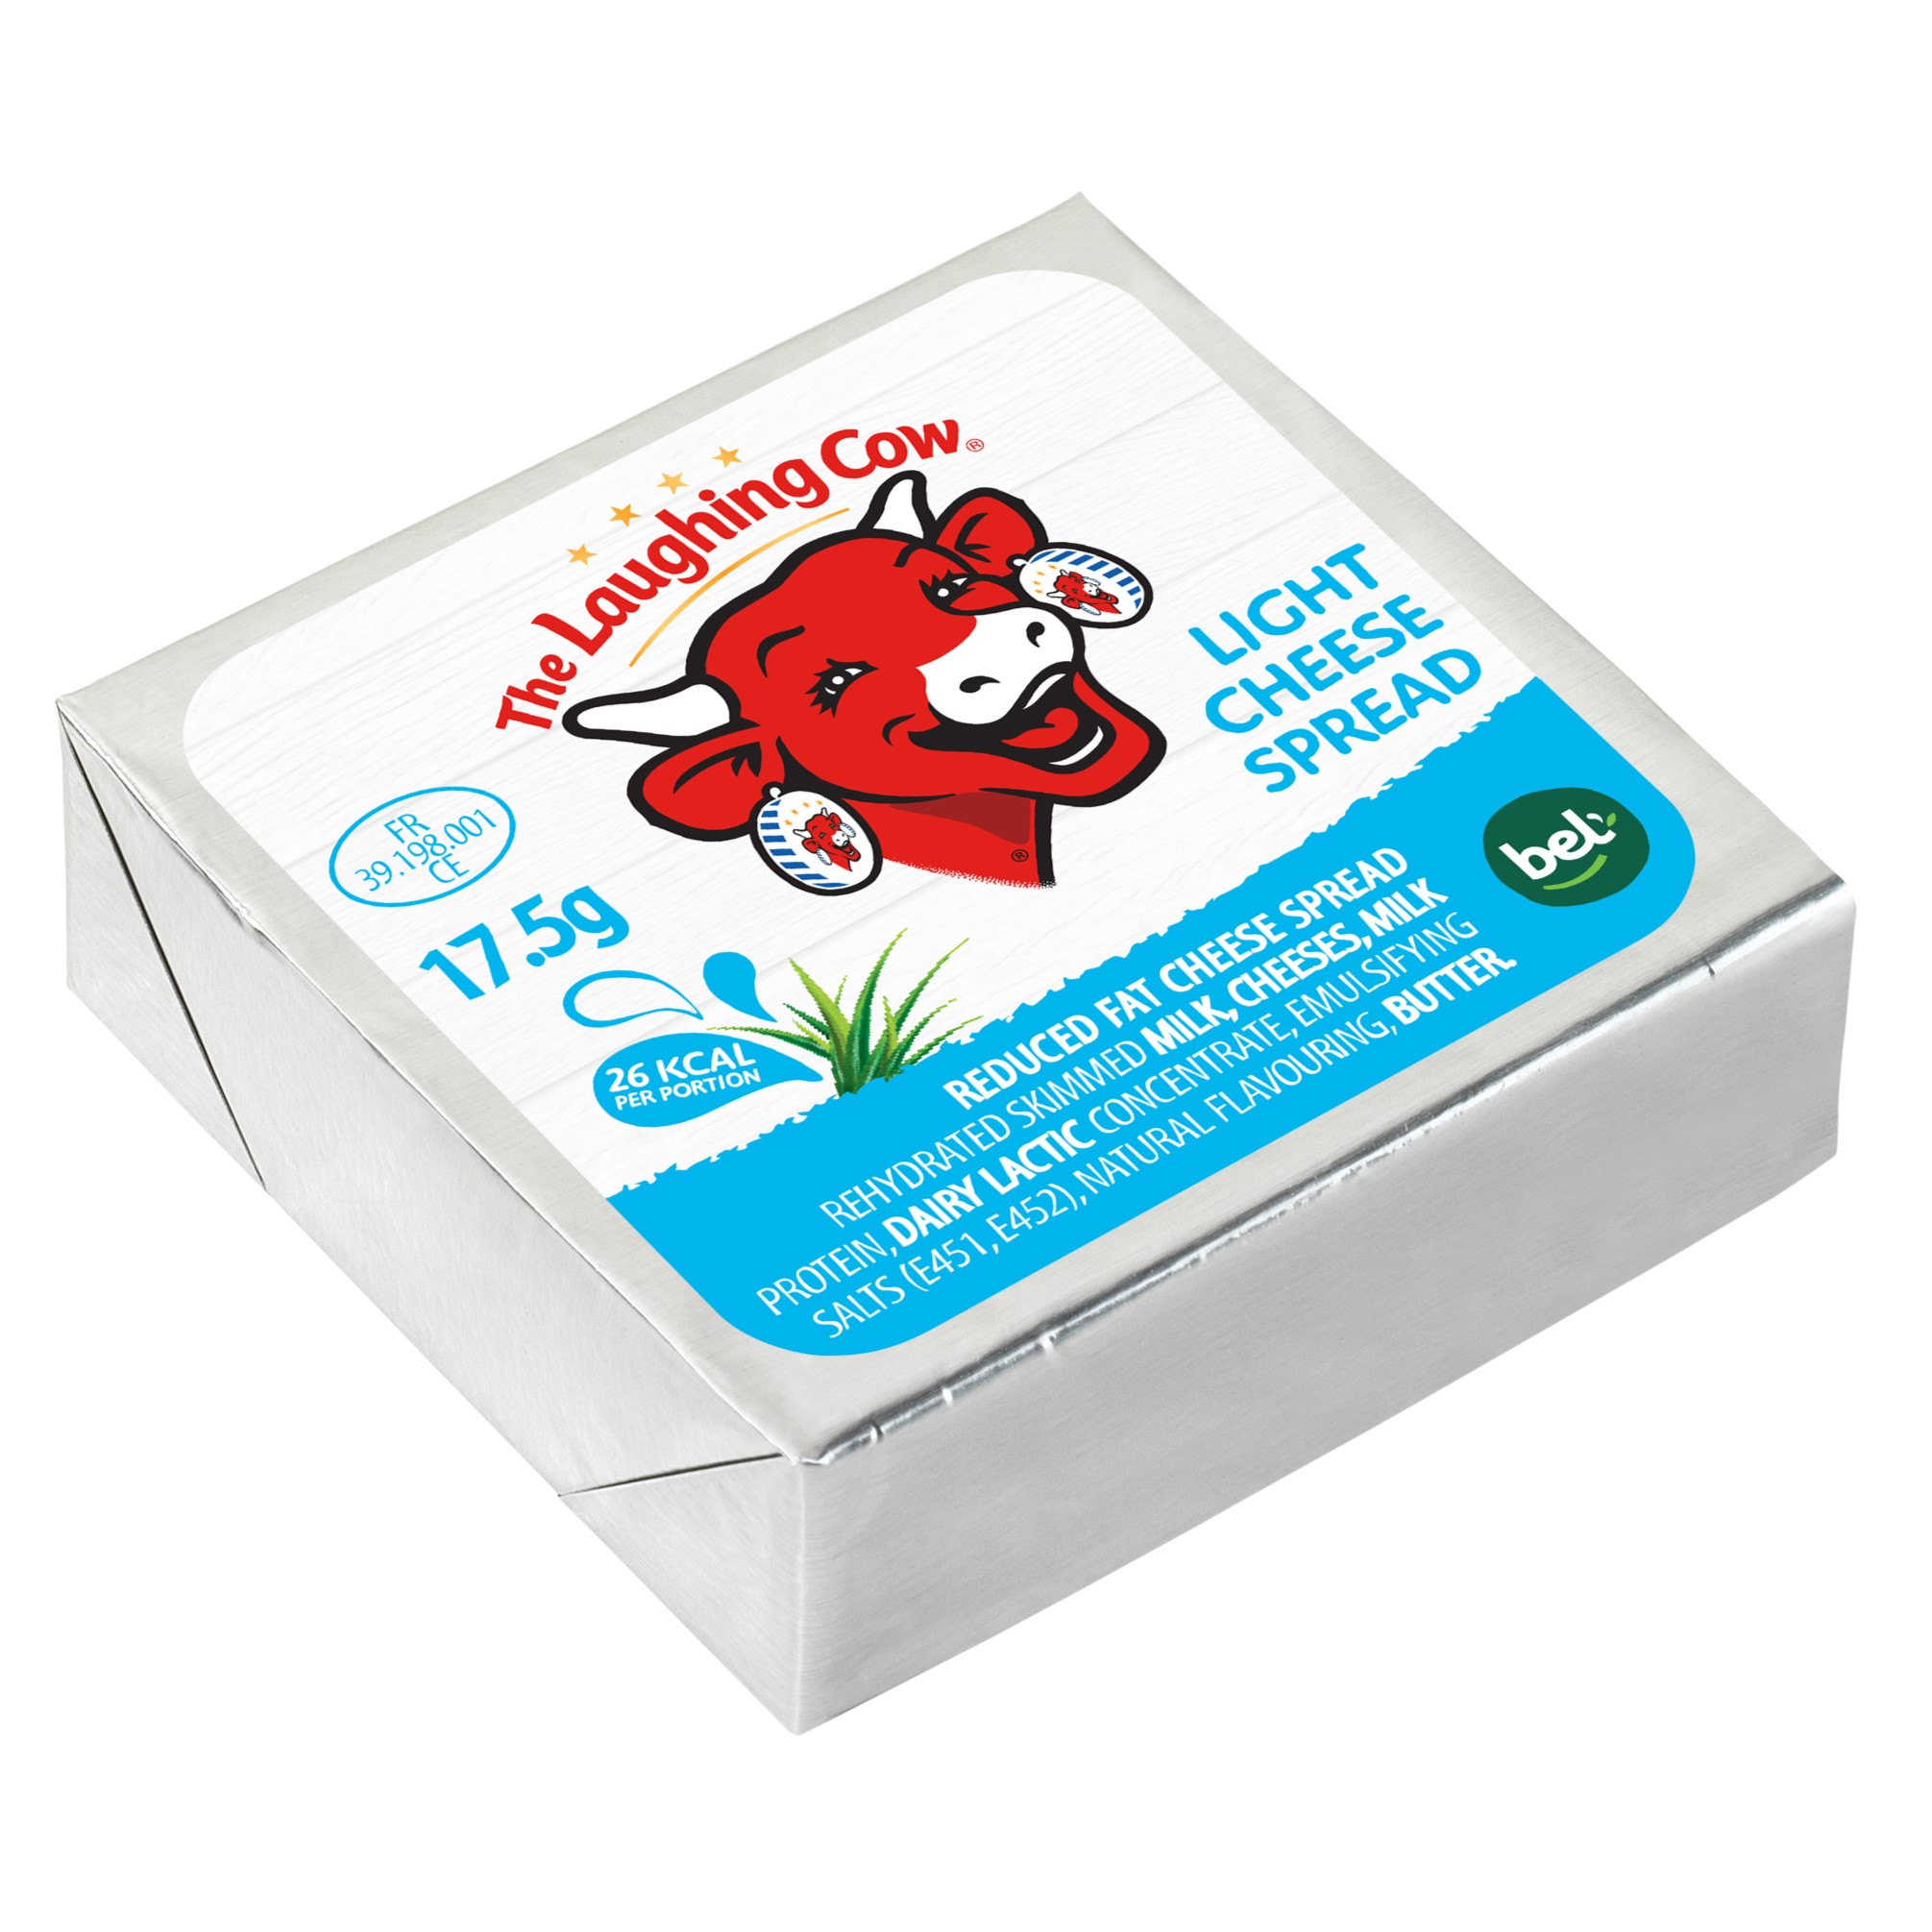 The Laughing Cow Light Cheese Spread Square Angle